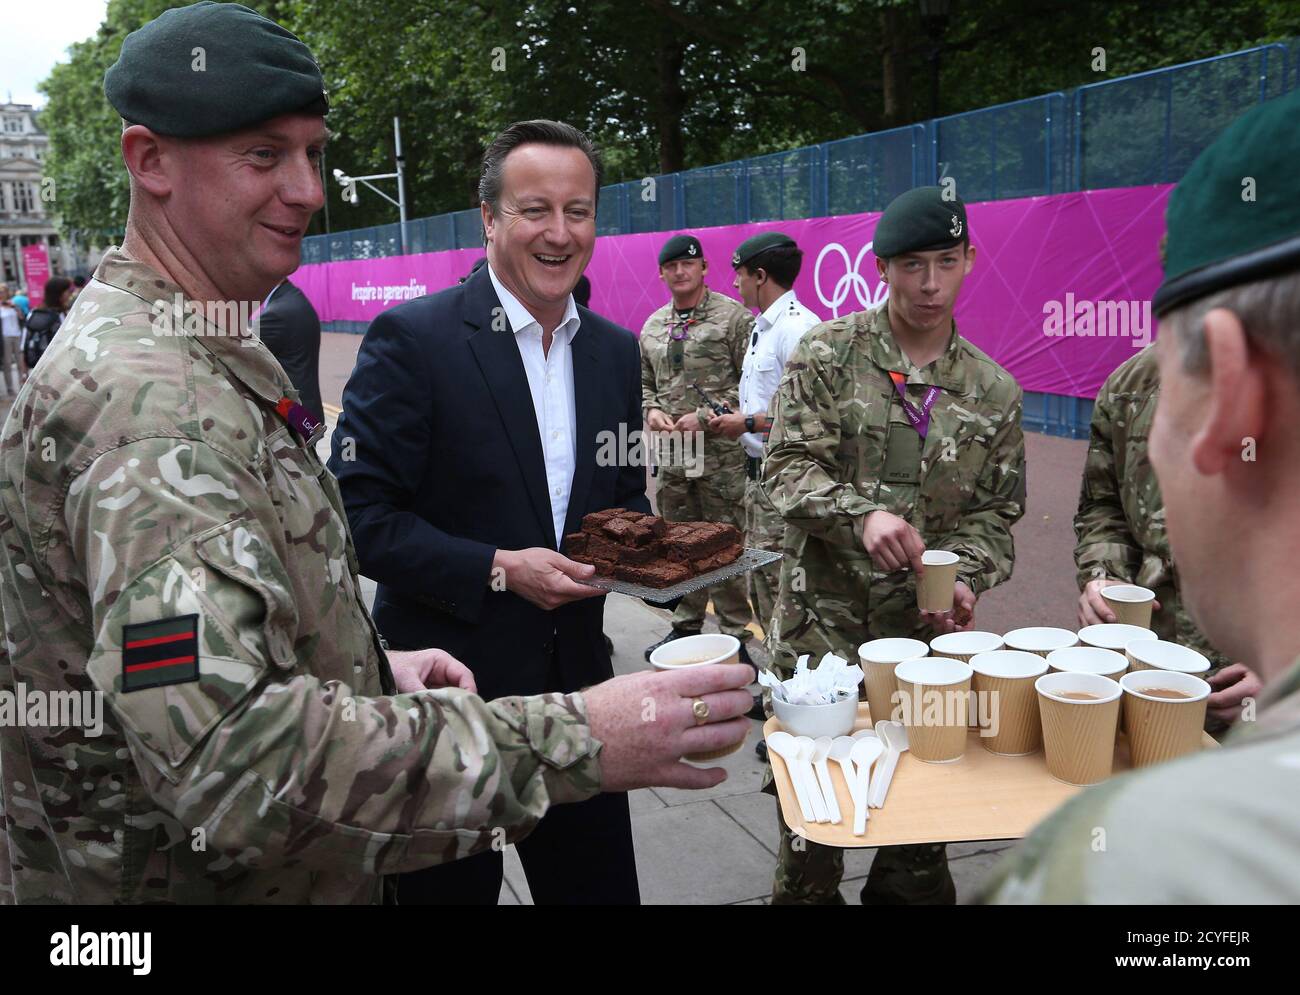 Britain's Prime Minister David Cameron hands out brownies as he meets with soldiers from 5th Battalion The Rifles on security duty near Downing Street in London August 2, 2012. REUTERS/Peter Macdiarmid/pool     (BRITAIN - Tags: MILITARY POLITICS SPORT OLYMPICS) Stock Photo